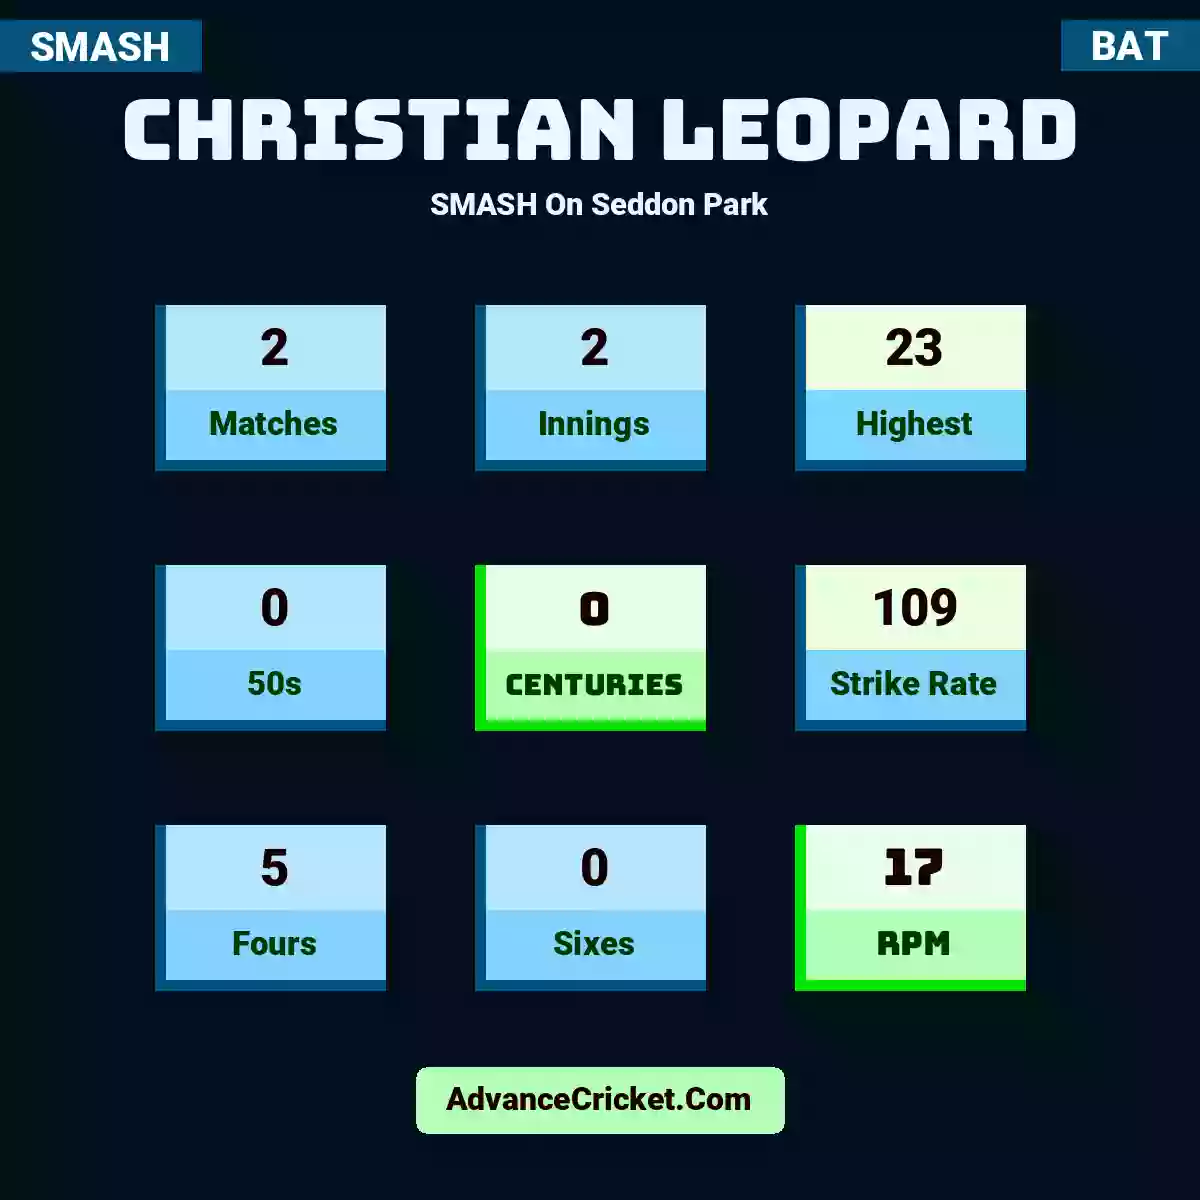 Christian Leopard SMASH  On Seddon Park, Christian Leopard played 2 matches, scored 23 runs as highest, 0 half-centuries, and 0 centuries, with a strike rate of 109. C.Leopard hit 5 fours and 0 sixes, with an RPM of 17.